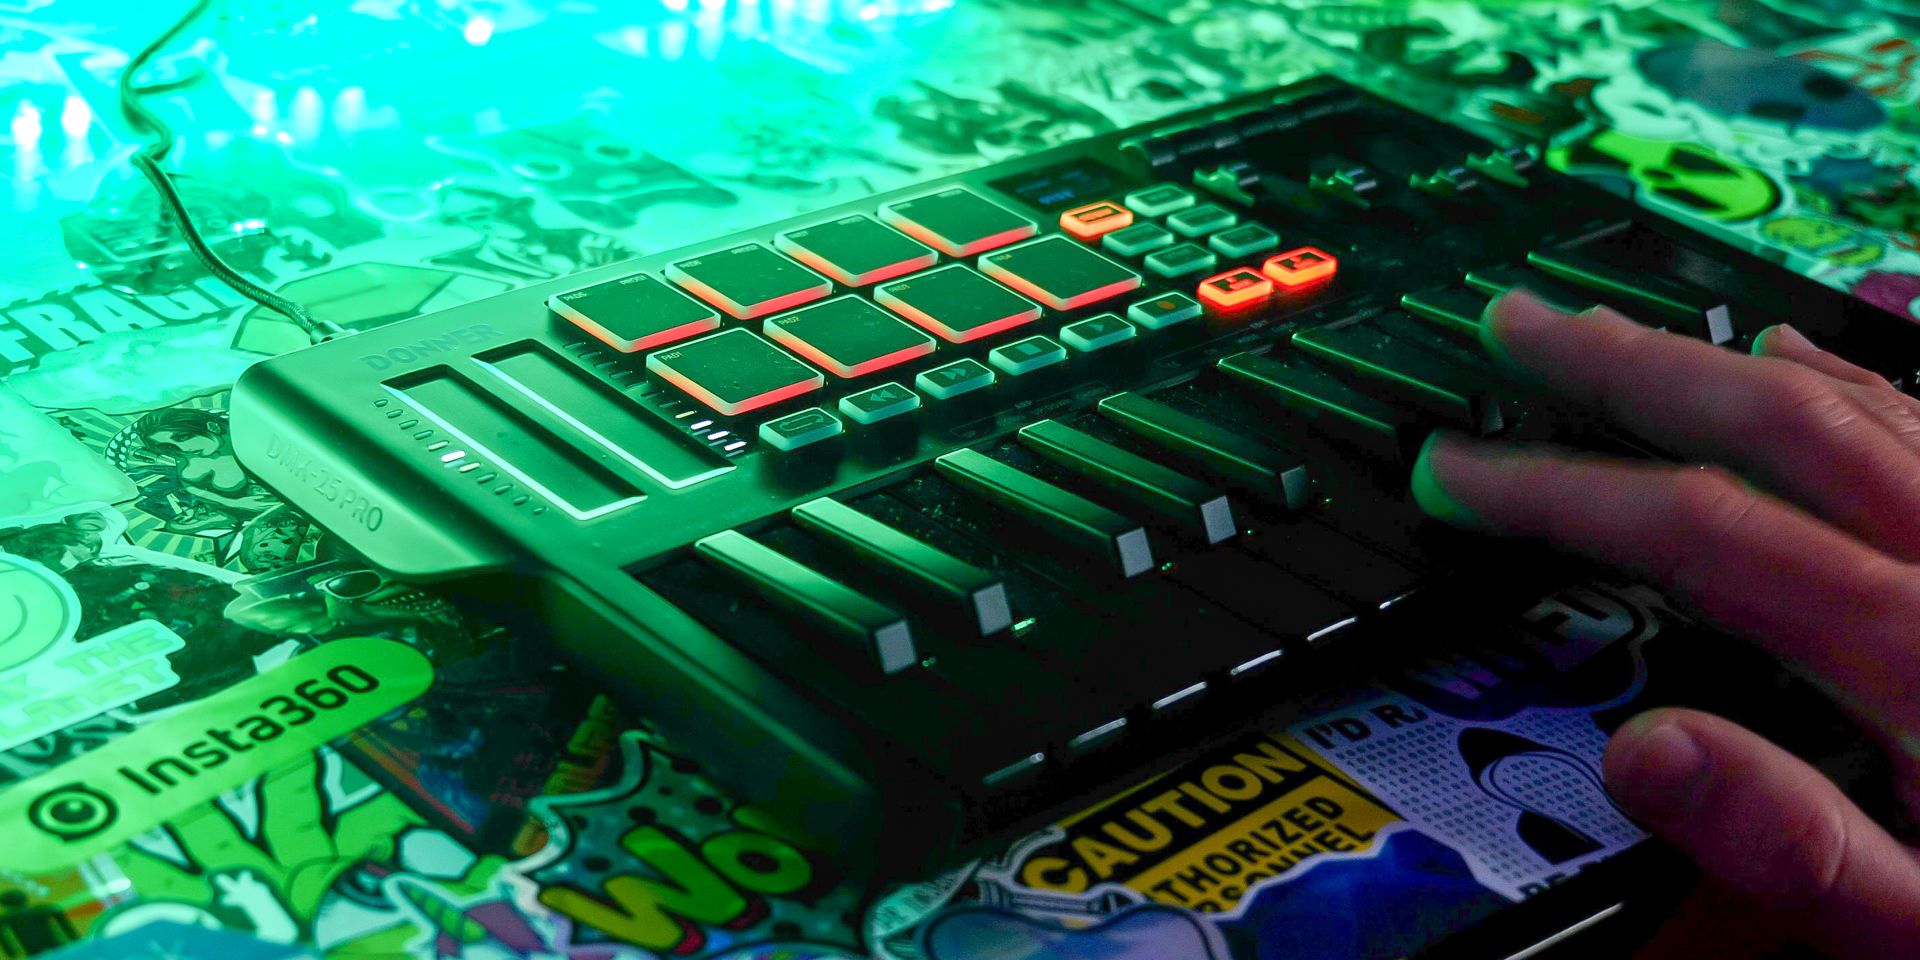 Donner DMK25 Pro Mini Midi Controller Review: Great Value, But Lacks Support